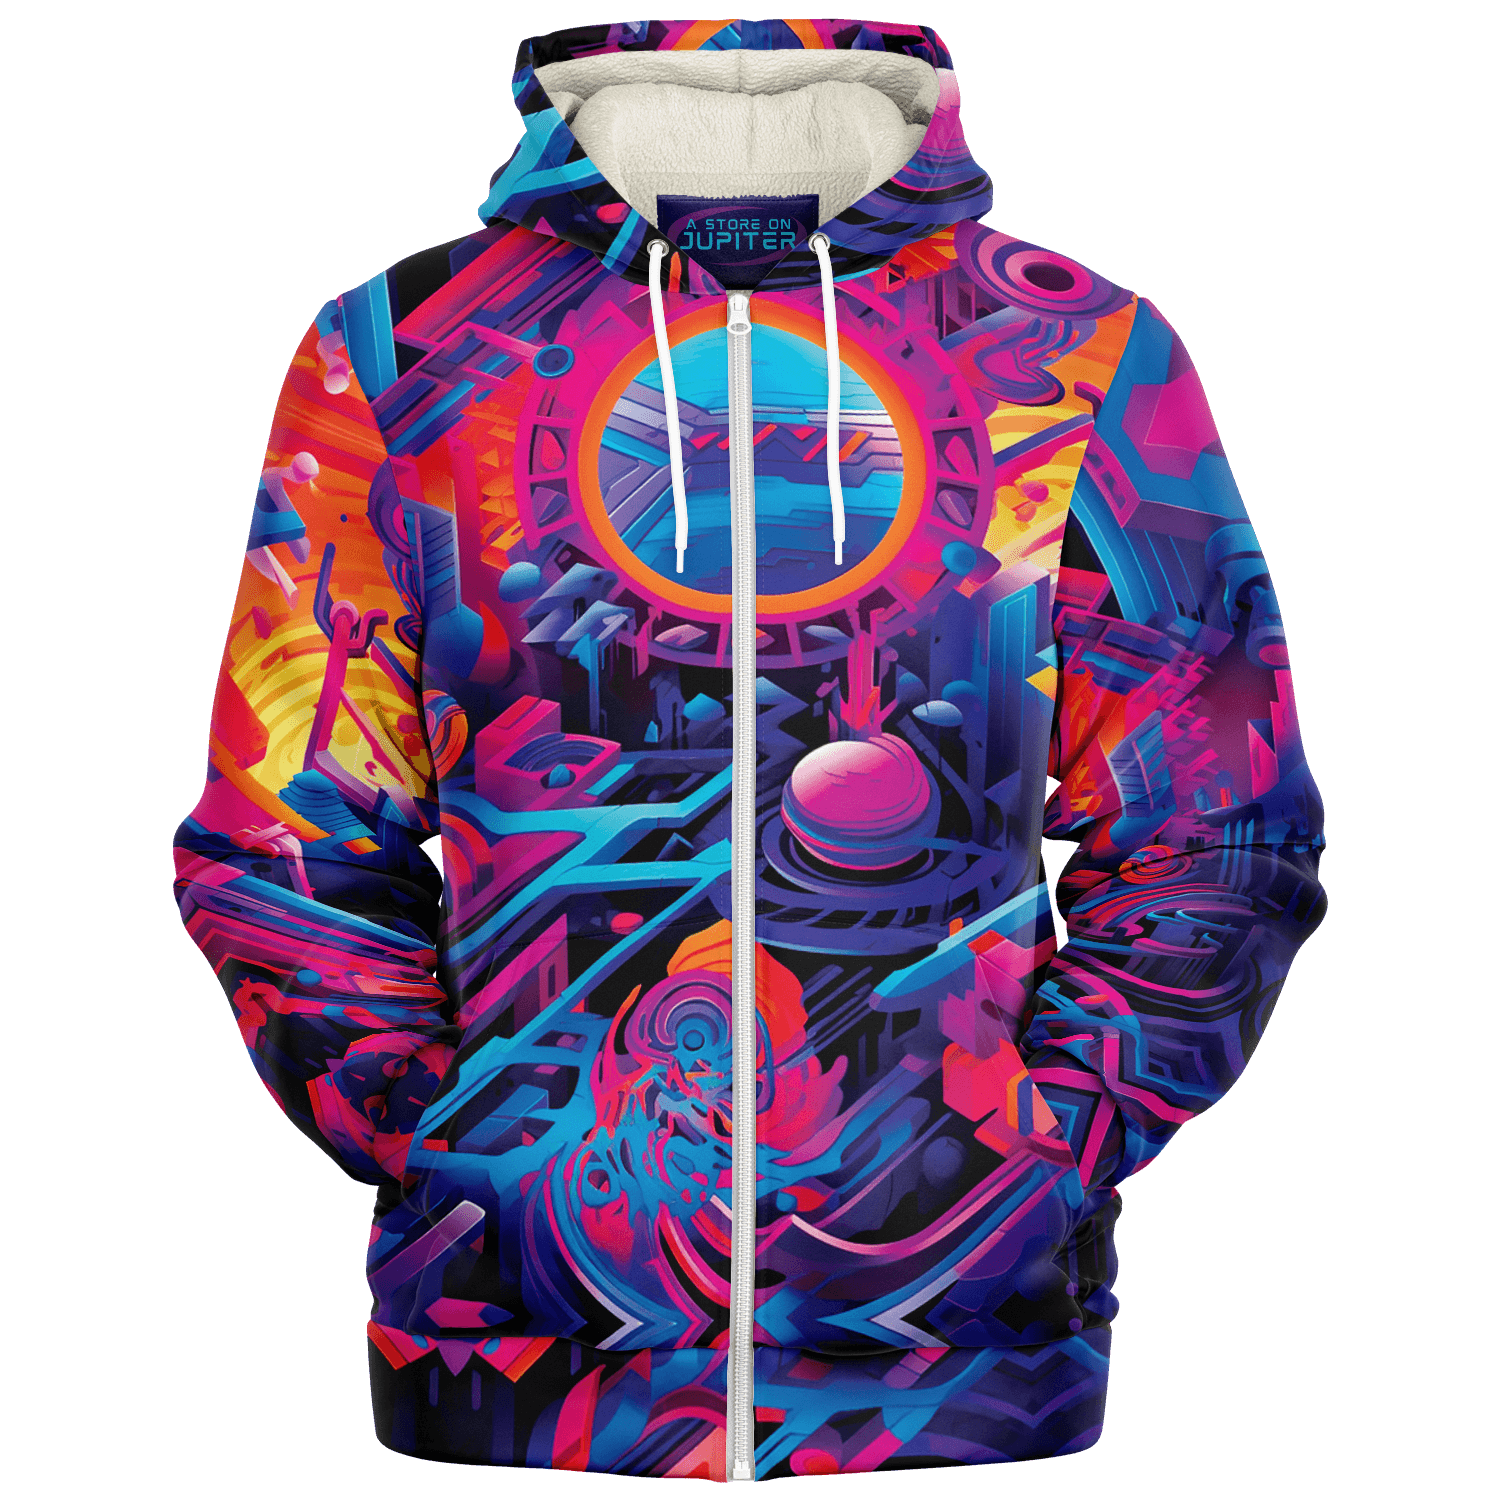 Twisted Cities Unisex Hoodie - A Store On Jupiter